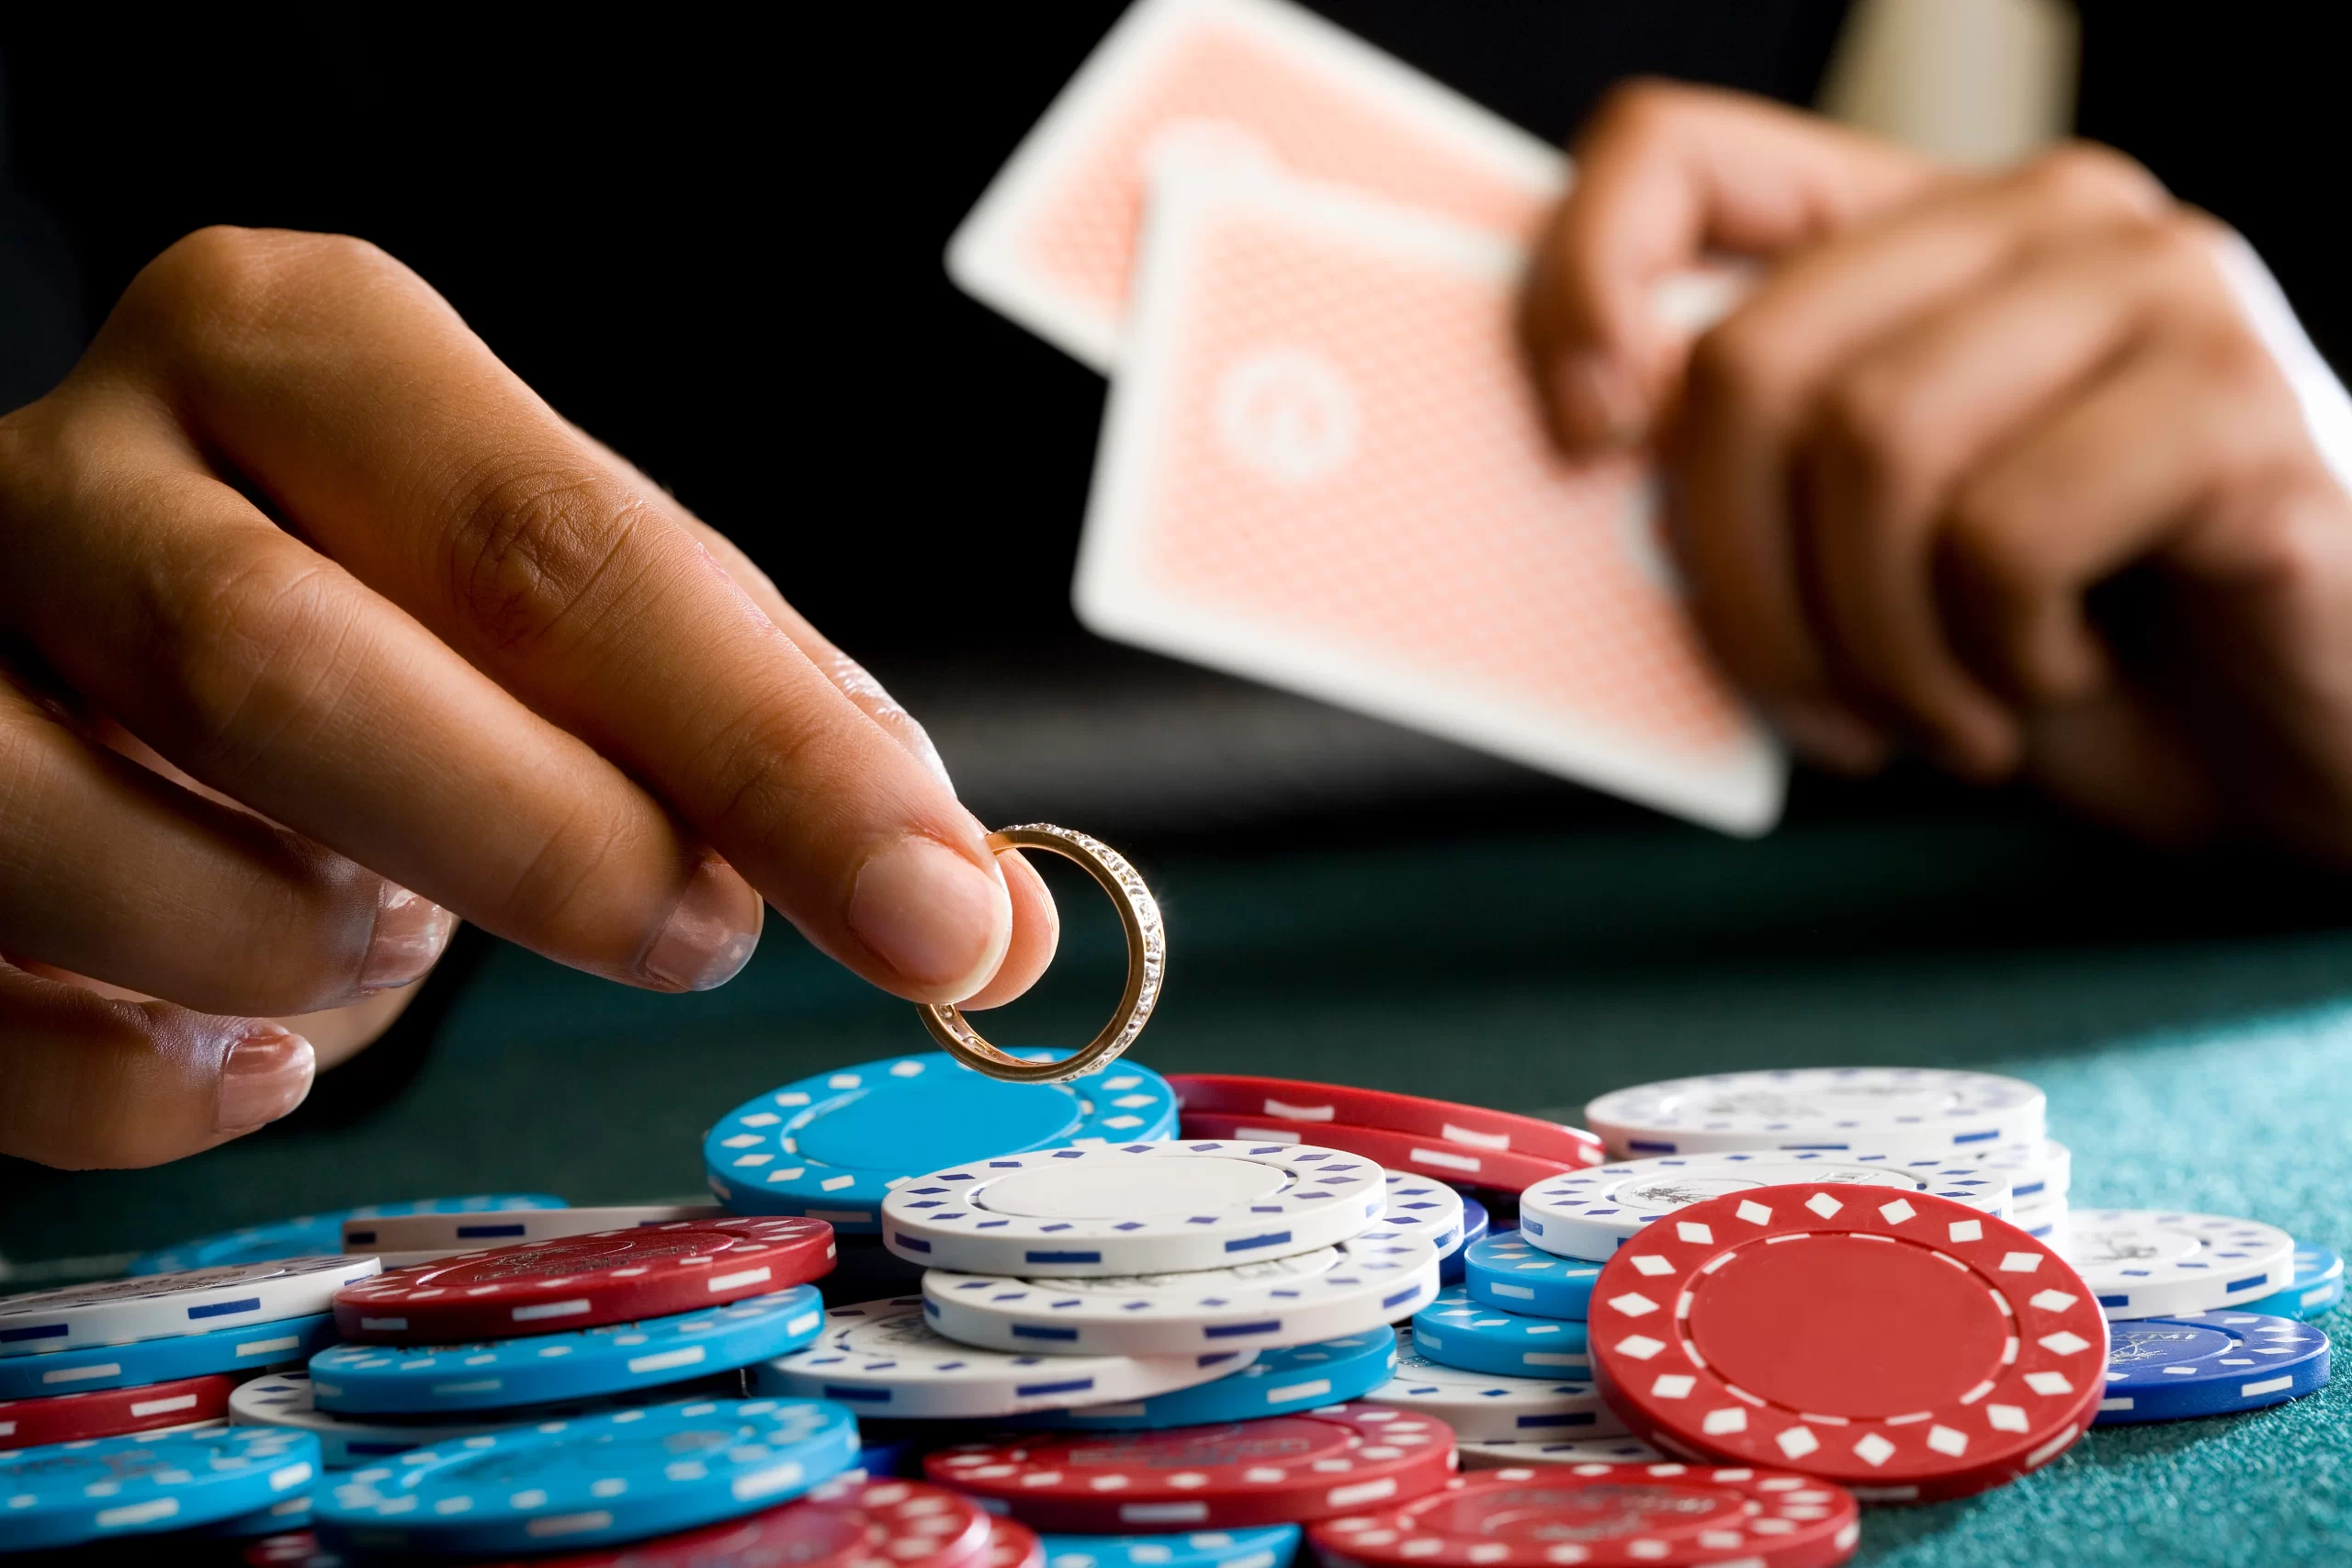 Create the best casino poker atmosphere– the equipment, the regulations, and the hands.